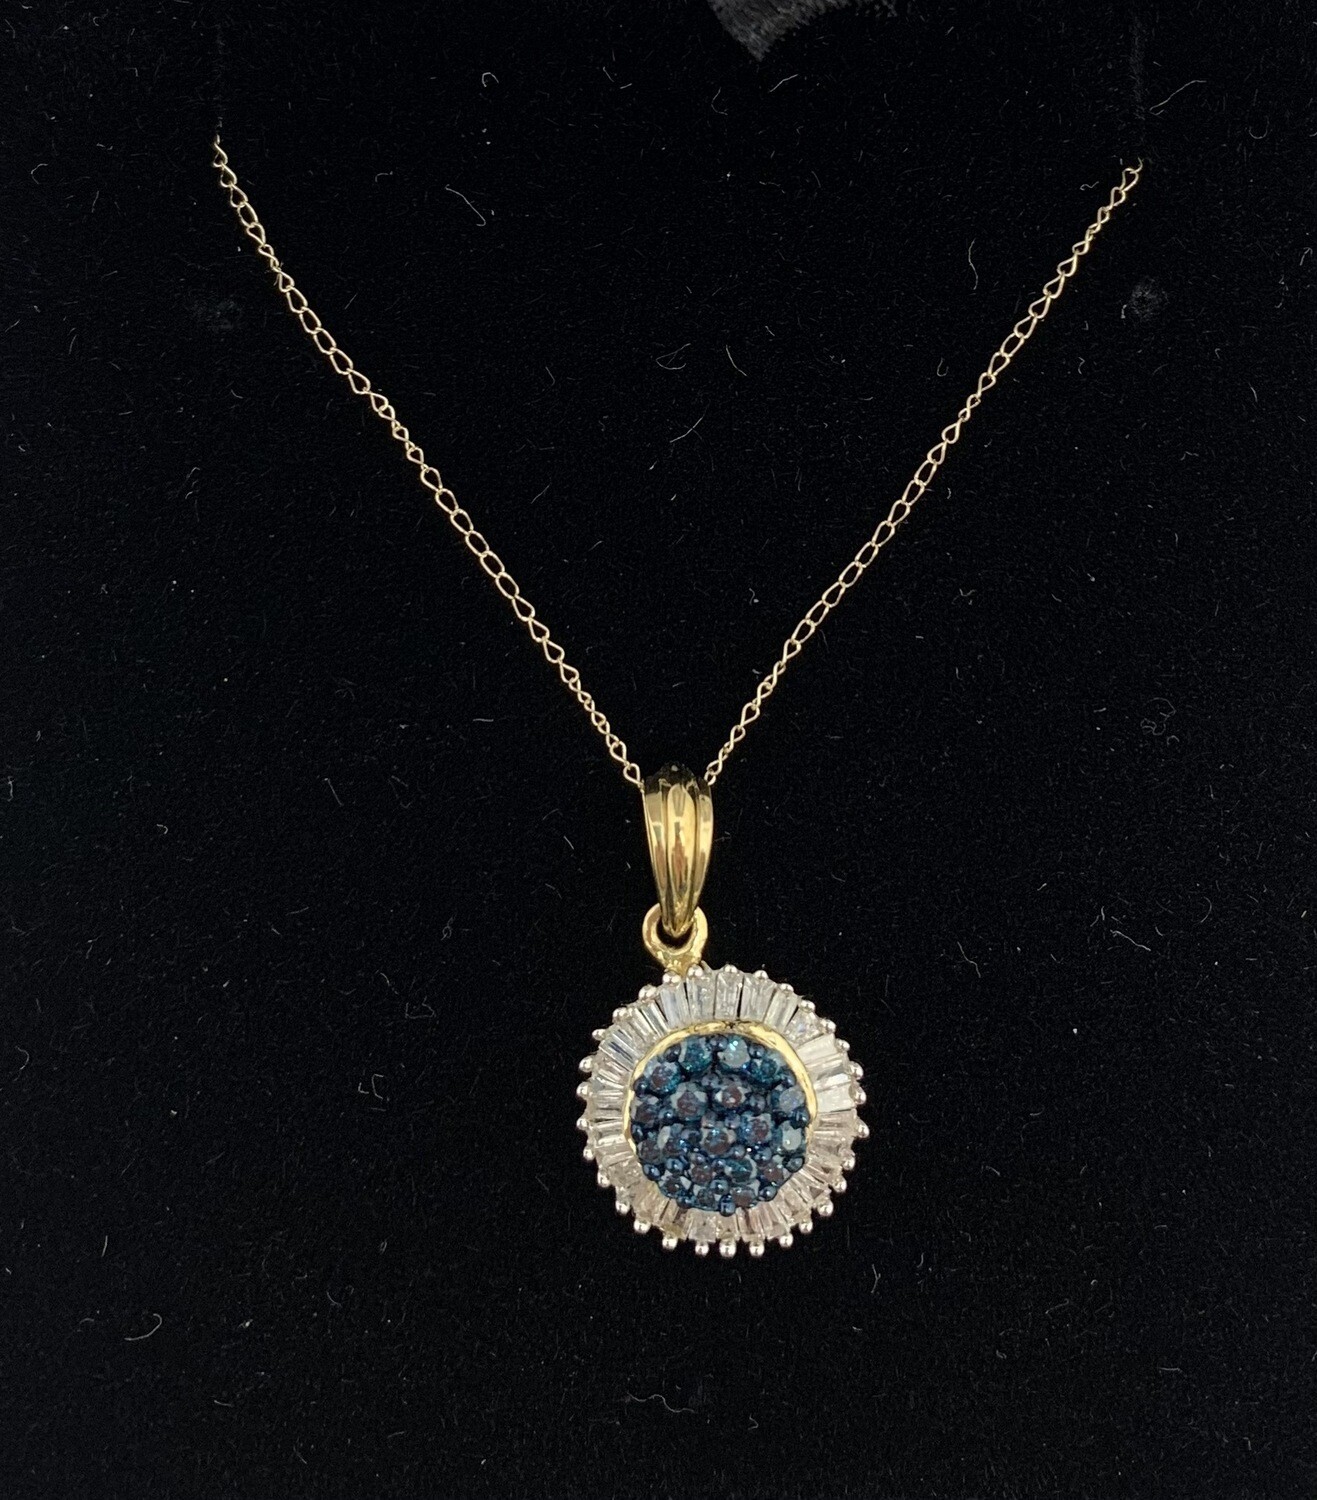 Blue and White Diamond Necklace  1/2 Ct Total Weight Blue Diamond Cluster With White Baguette Halo Pendant Necklace 10 Kt. Yellow Gold